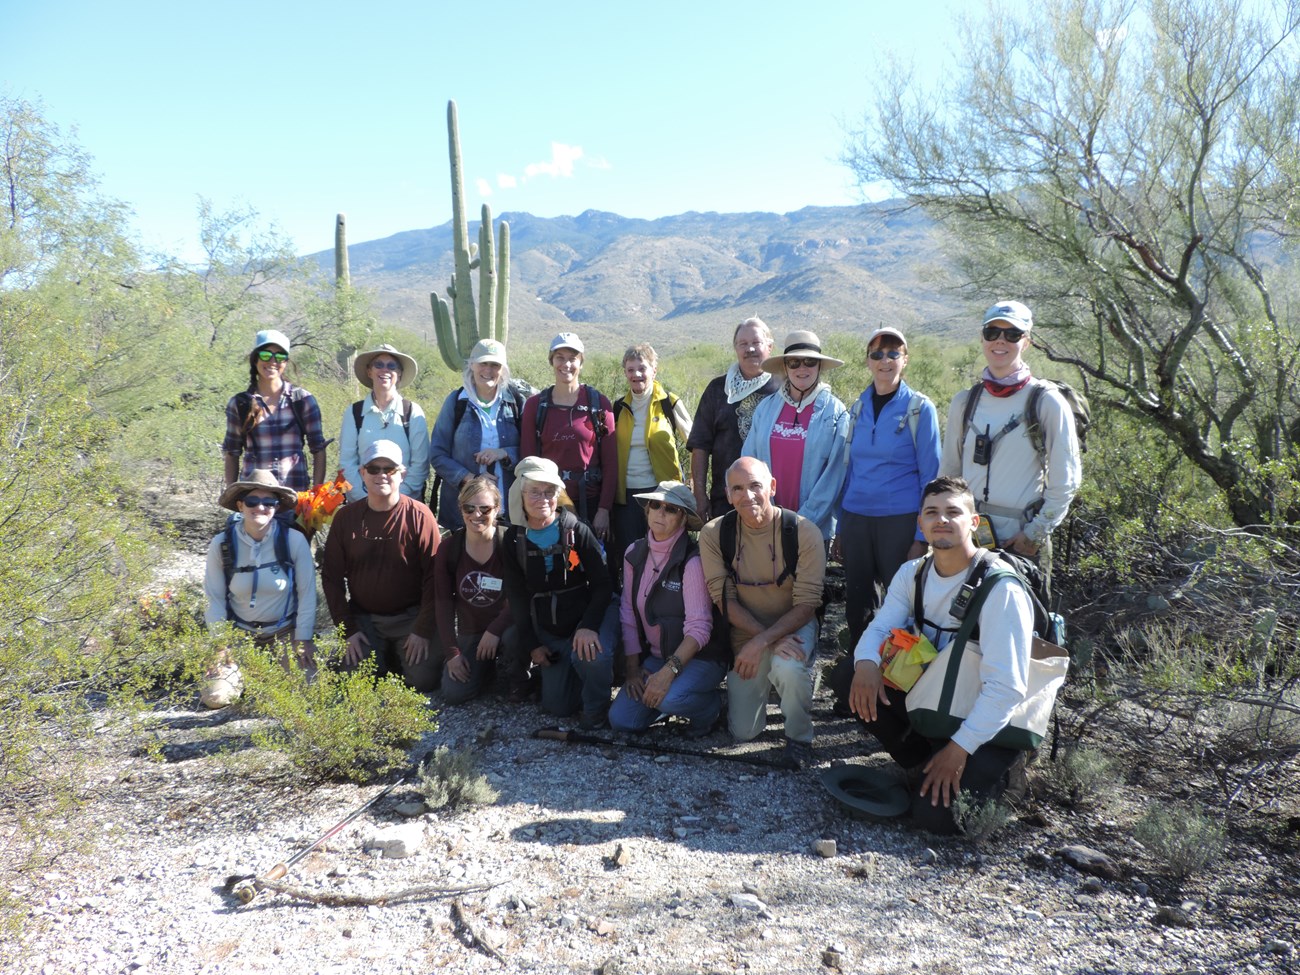 Sky Island Alliance volunteer group photo after the census. Behind them are mountains, saguaros, and lots of vegetation